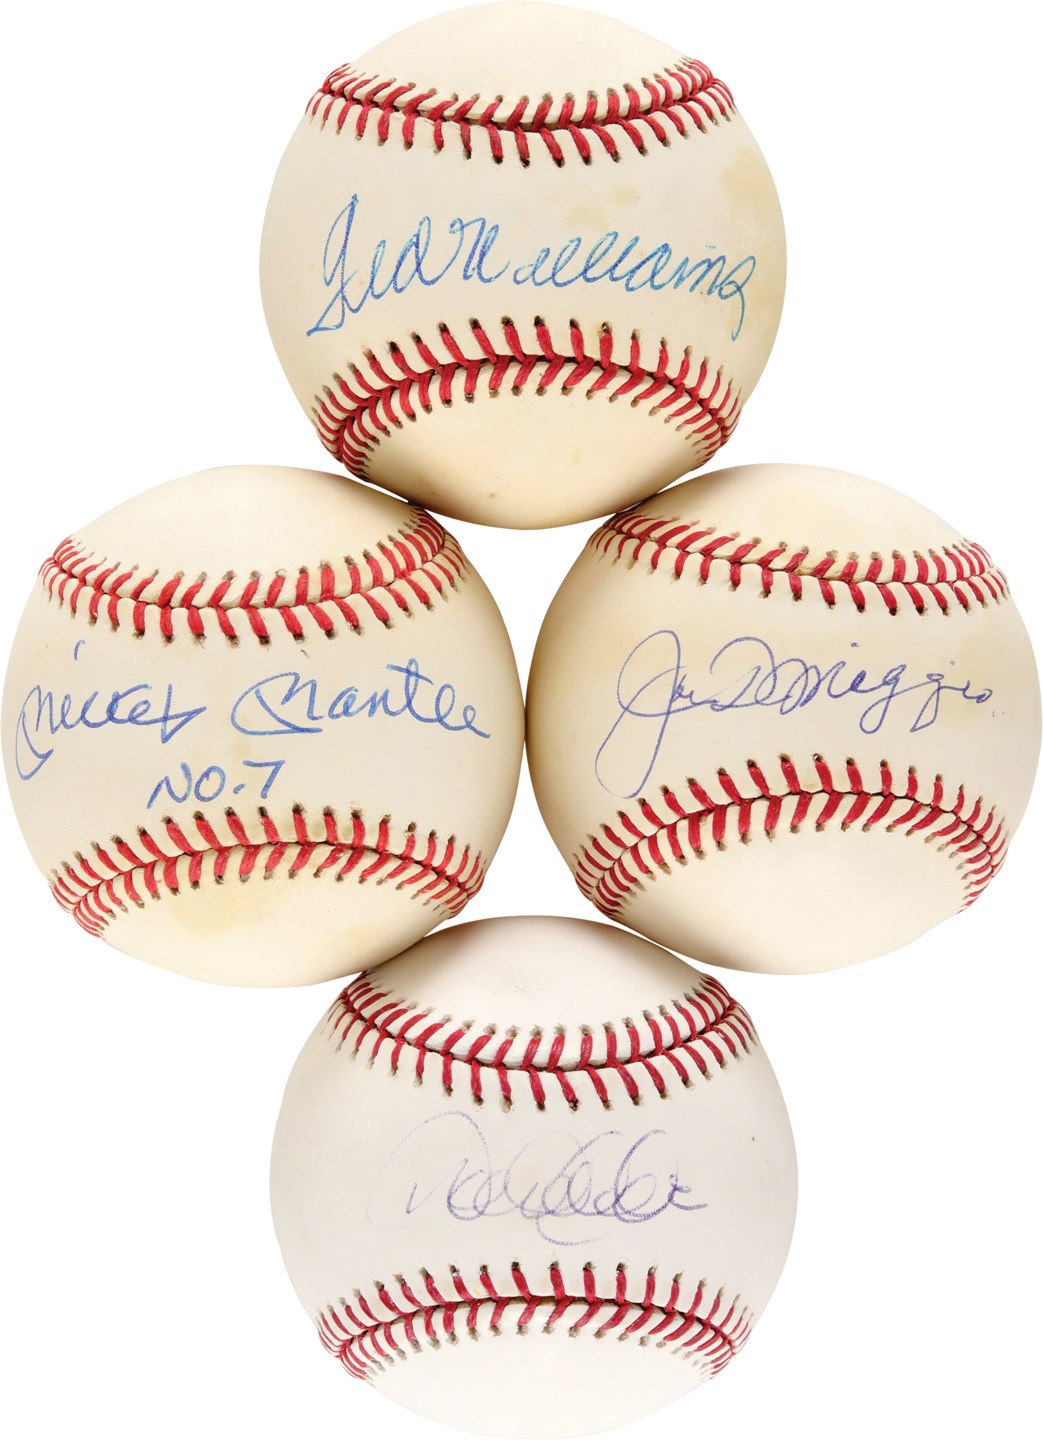 Baseball Autographs - Signed Baseball Collection w/Mantle, DiMaggio, Williams, & Jeter (8)